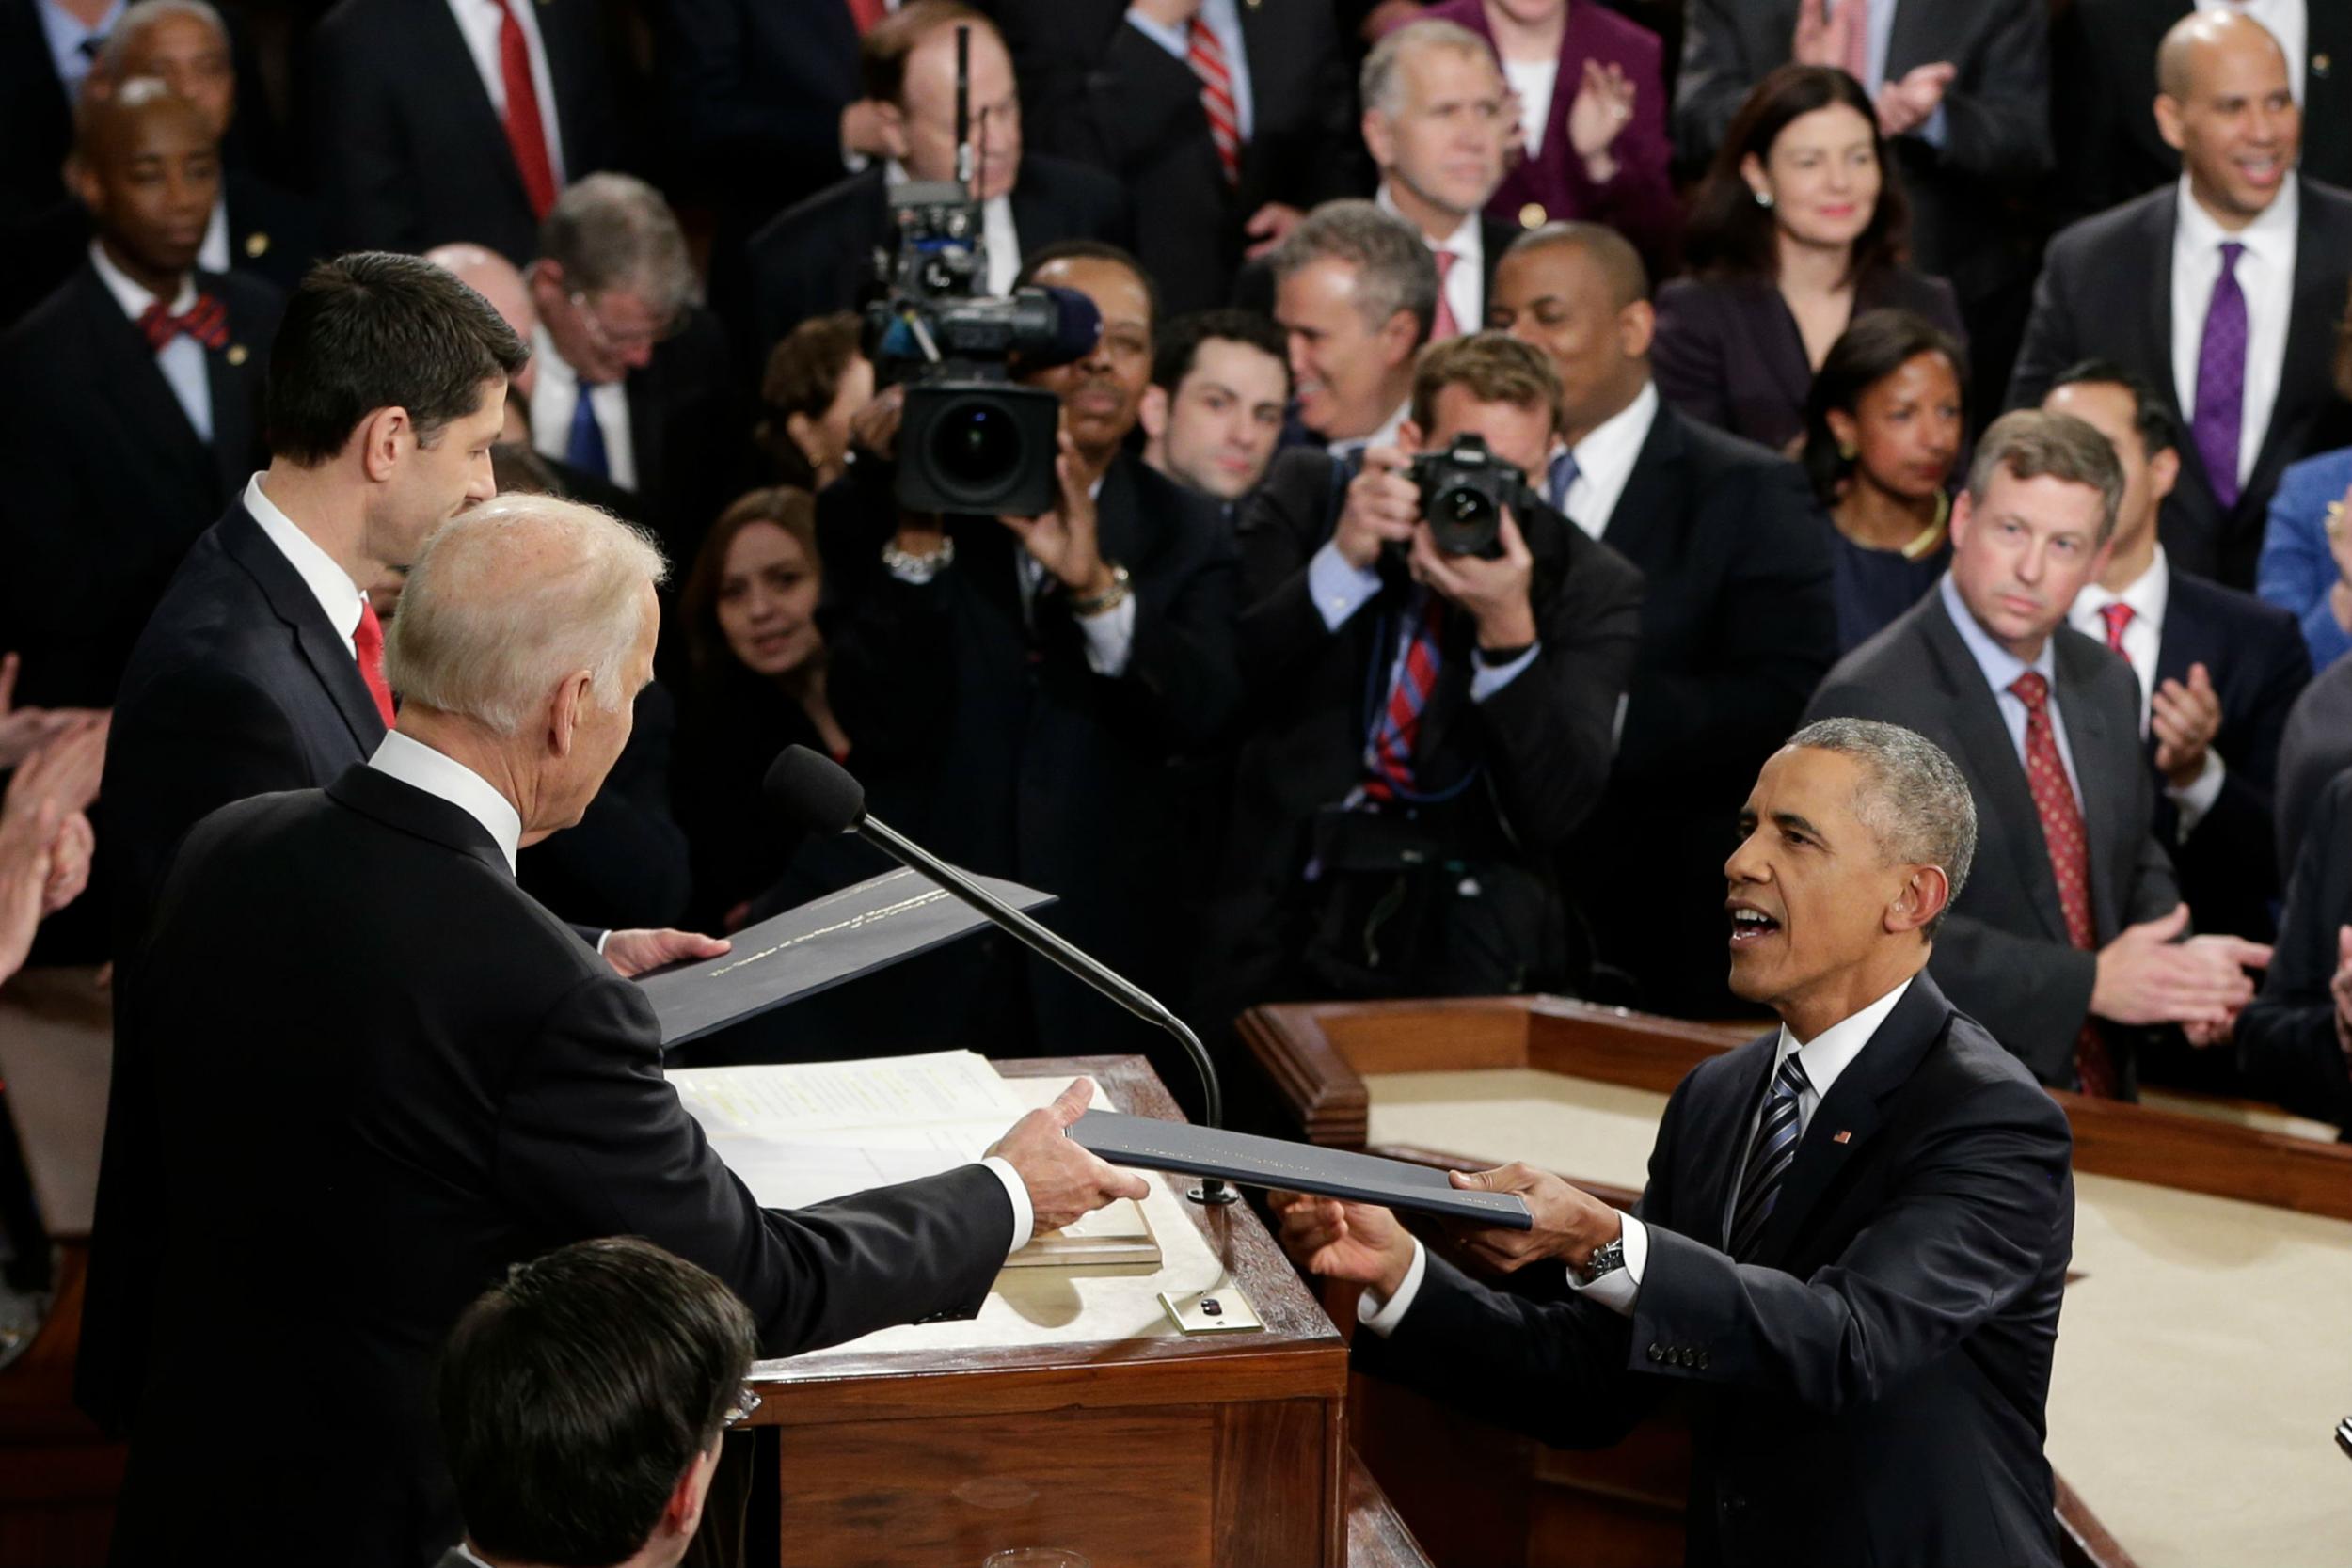 Mr Obama was warmly applauded when he talked about gun control, climate change and immigration